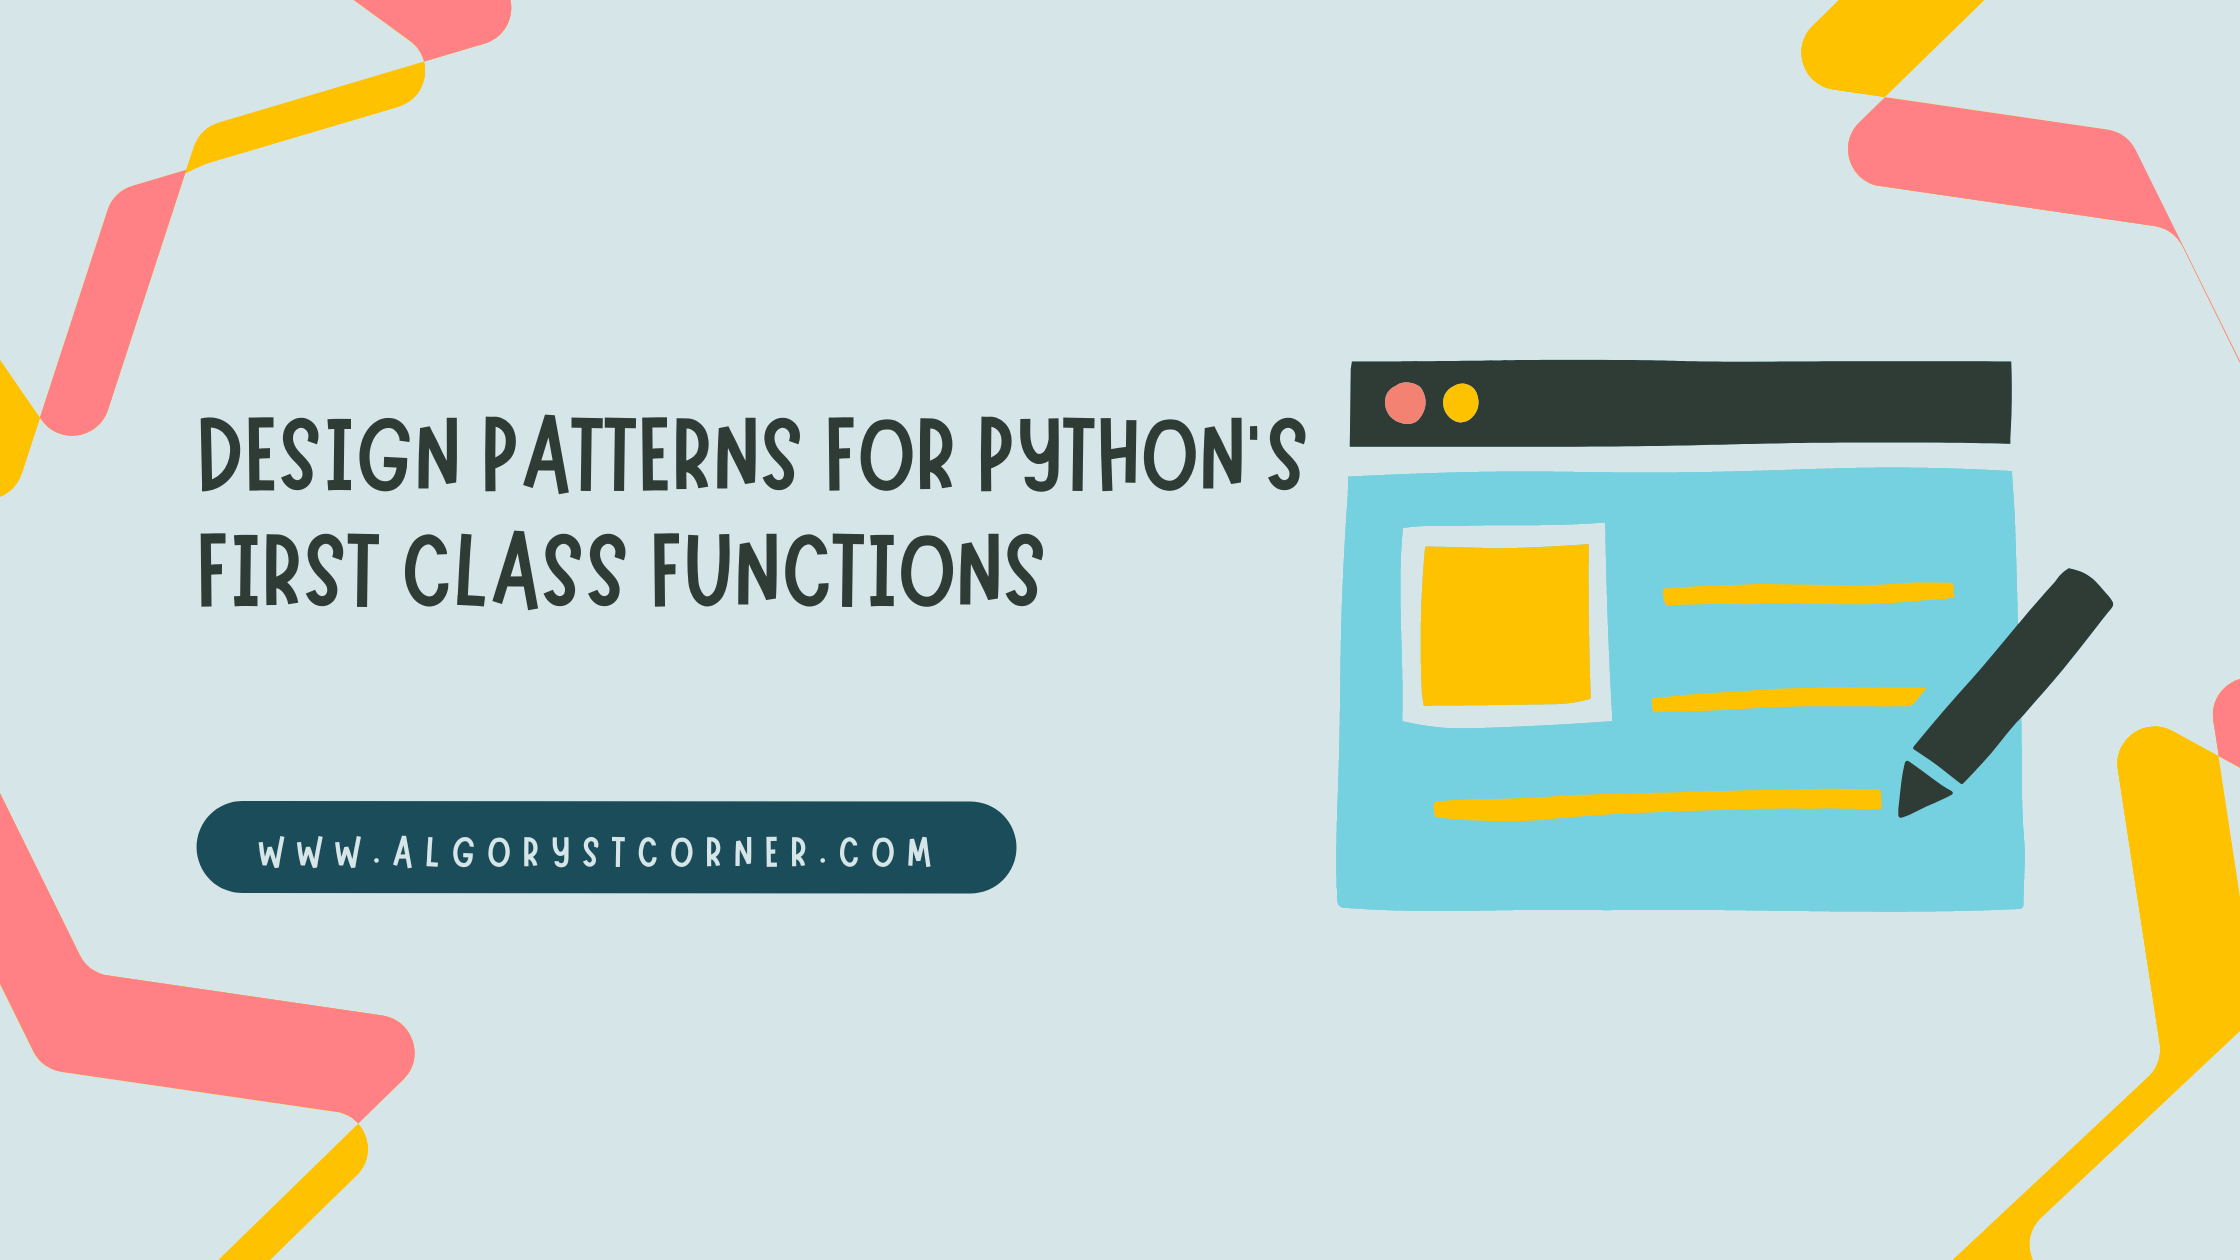 Design Patterns for Python’s First Class Functions